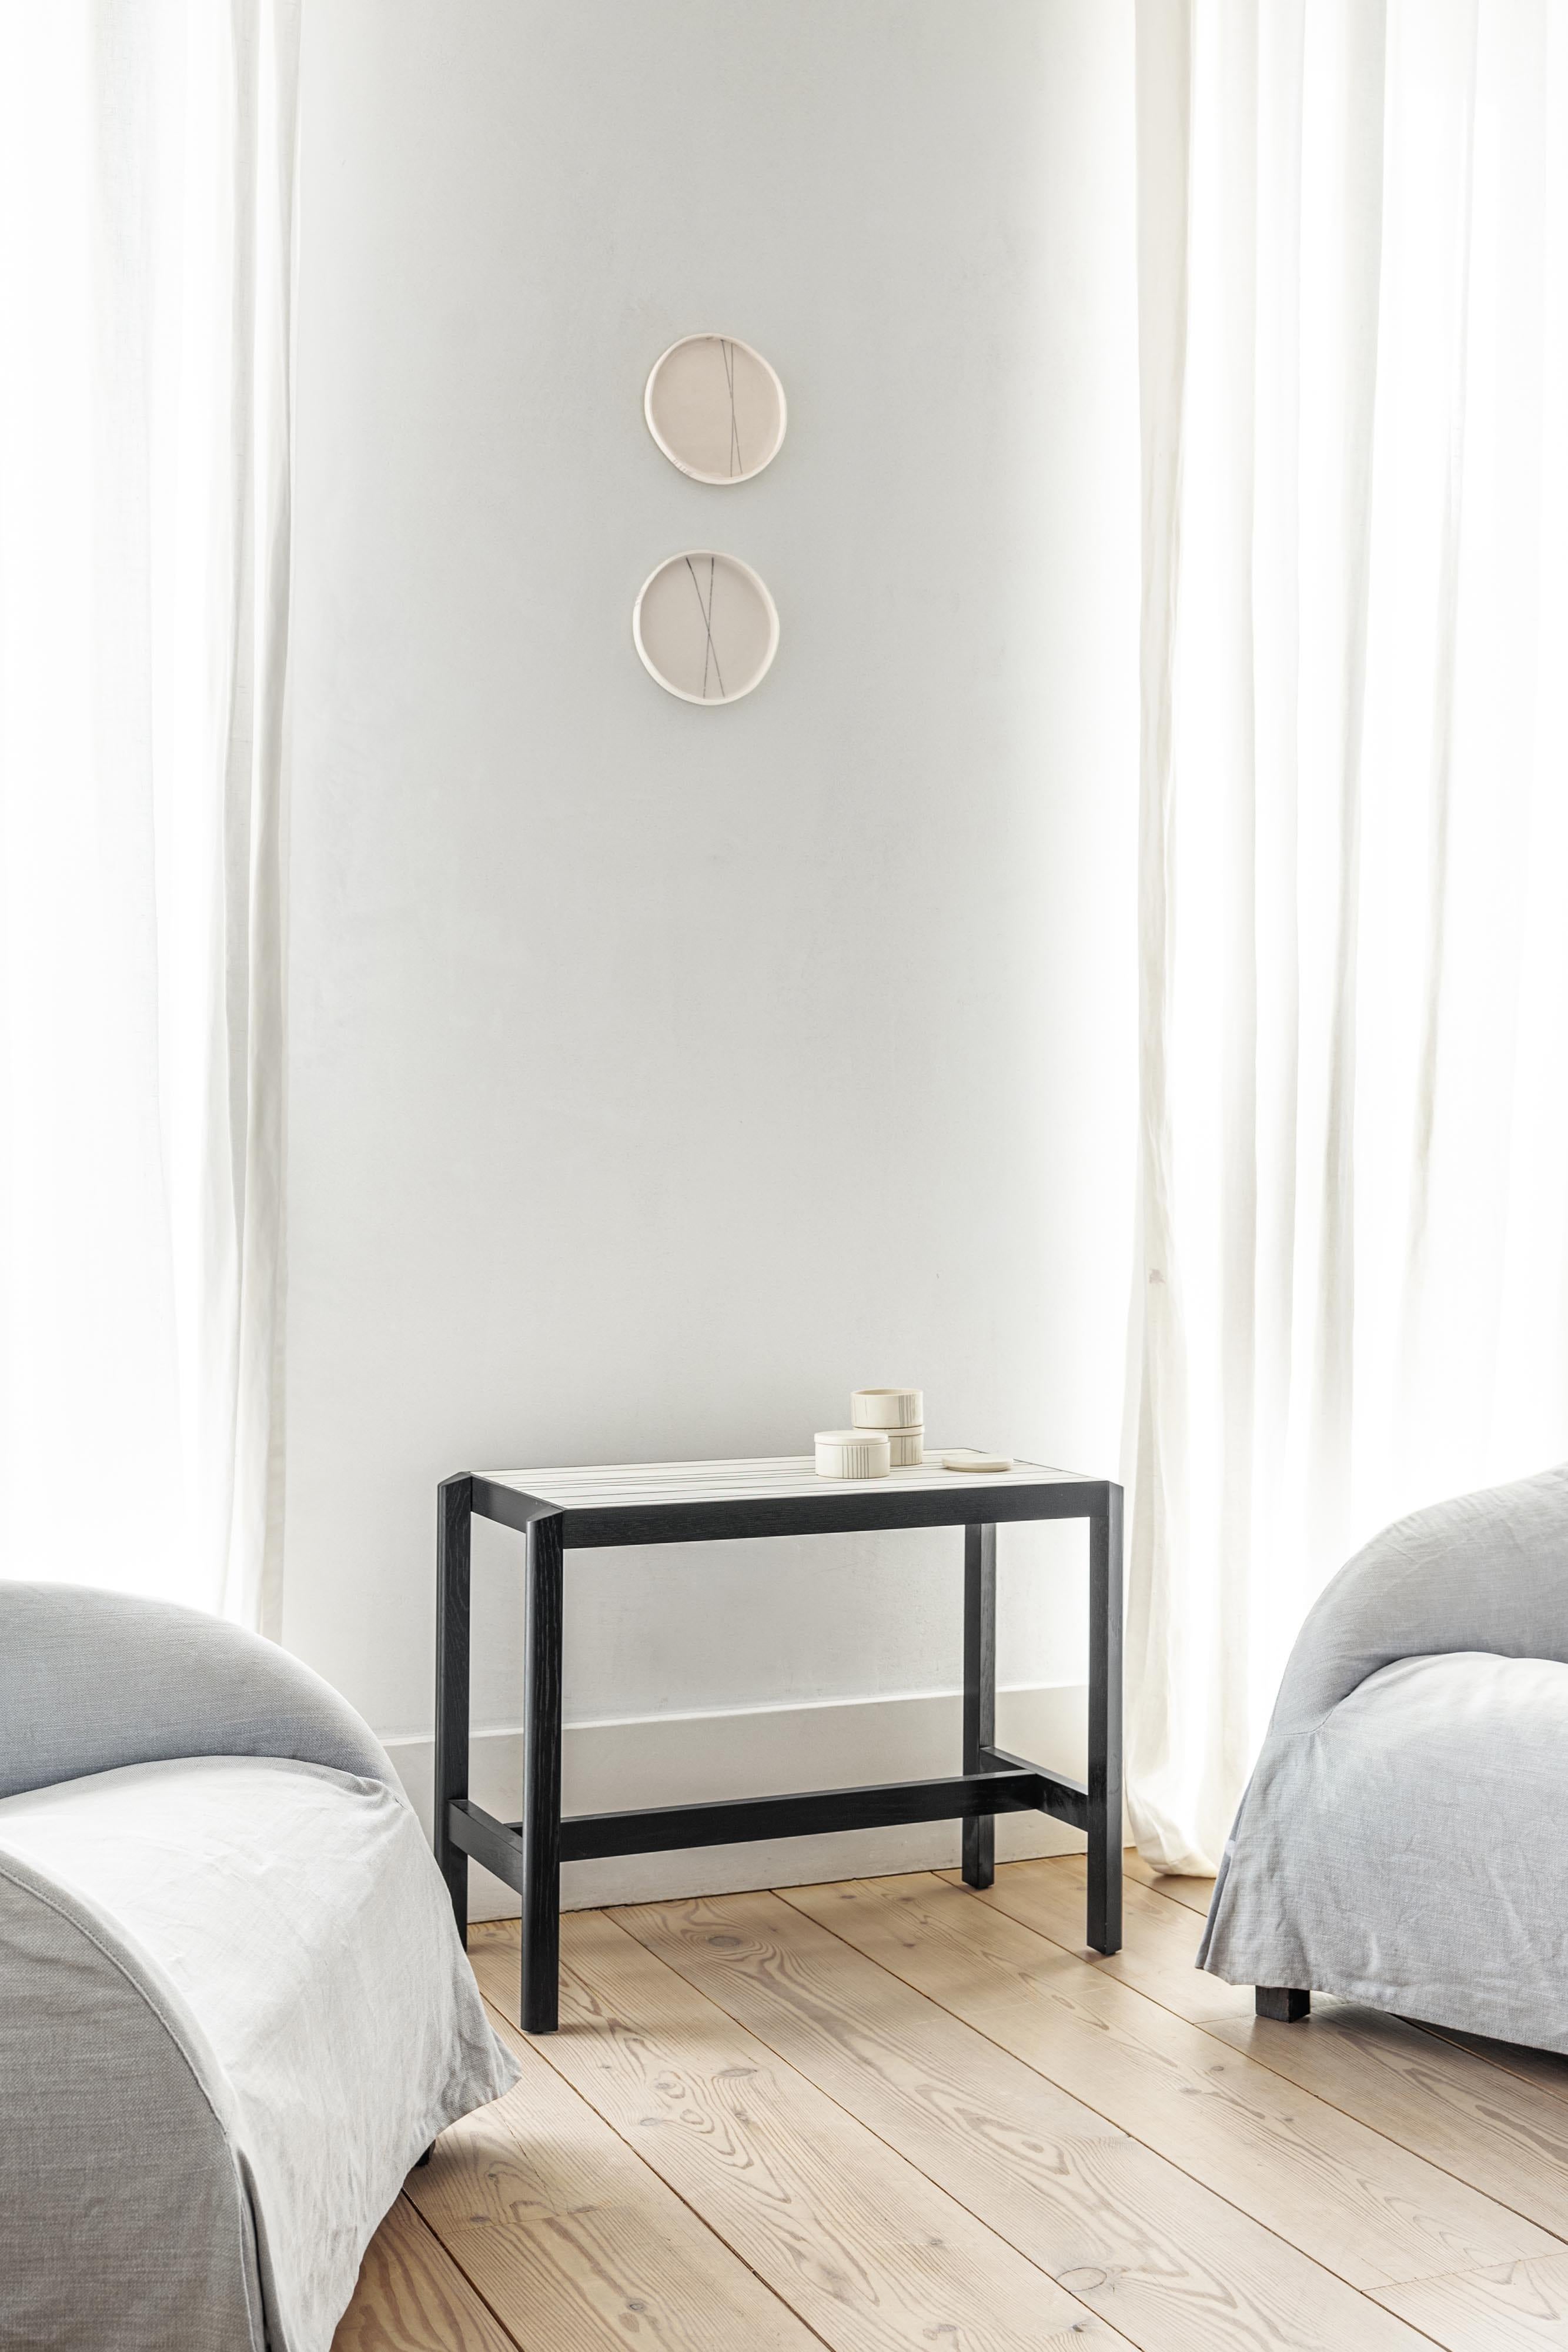 Console table L
in solid wood with open-pore lacquer finish in .46 black, ceramic tile insert.

The JUSTE console table is a luxurious statement piece. The top consists of a single oversized ceramic tile, custom-made in Italy. Resting within its